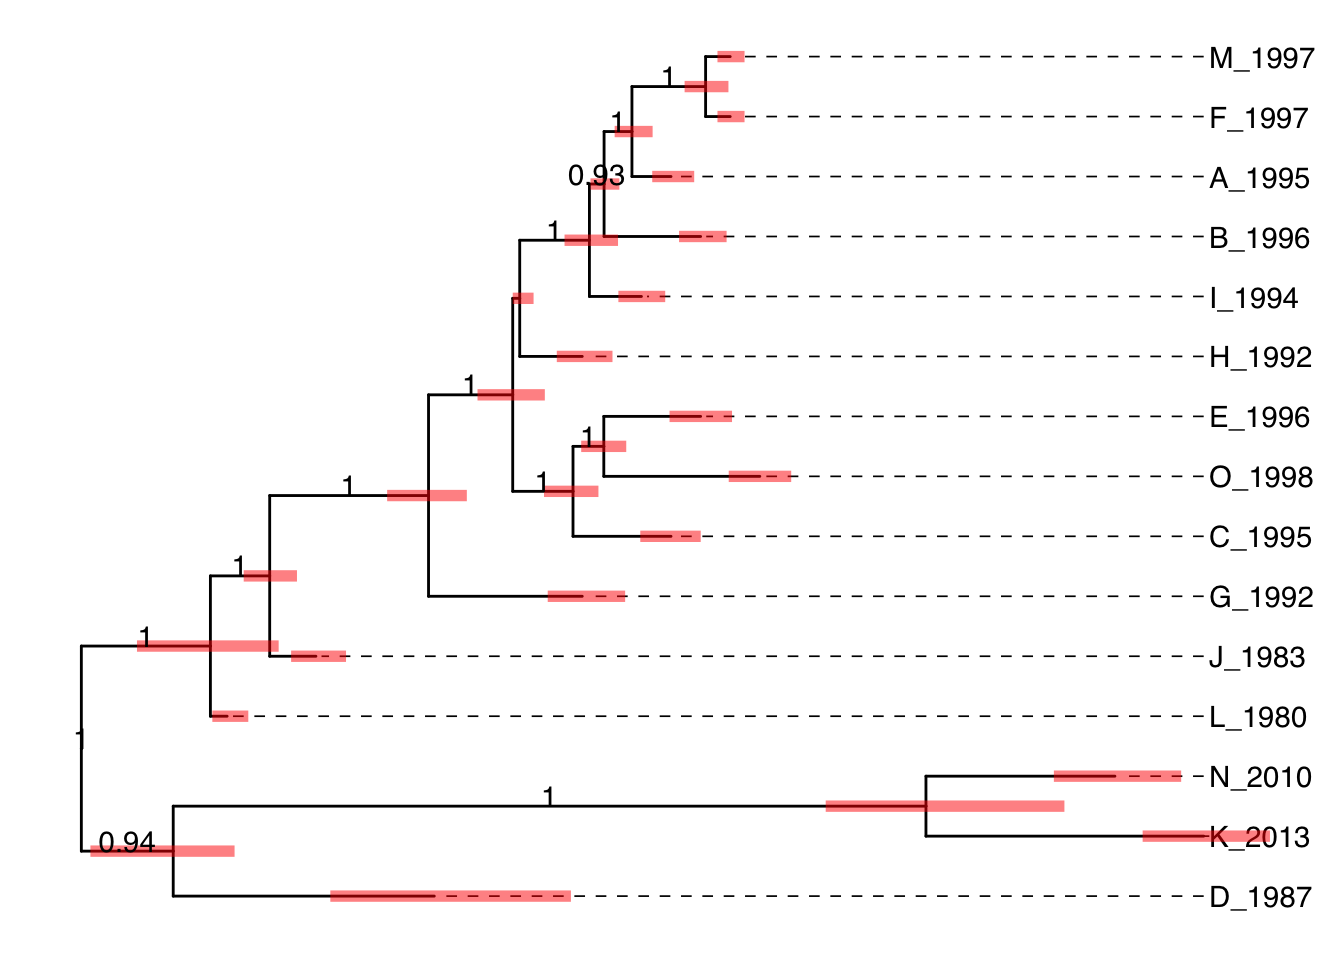 Annotating BEAST tree with length_95%_HPD and posterior. Branch length credible intervals (95% HPD) were displayed as red horizontal bars and clade posterior values were shown on the middle of branches.